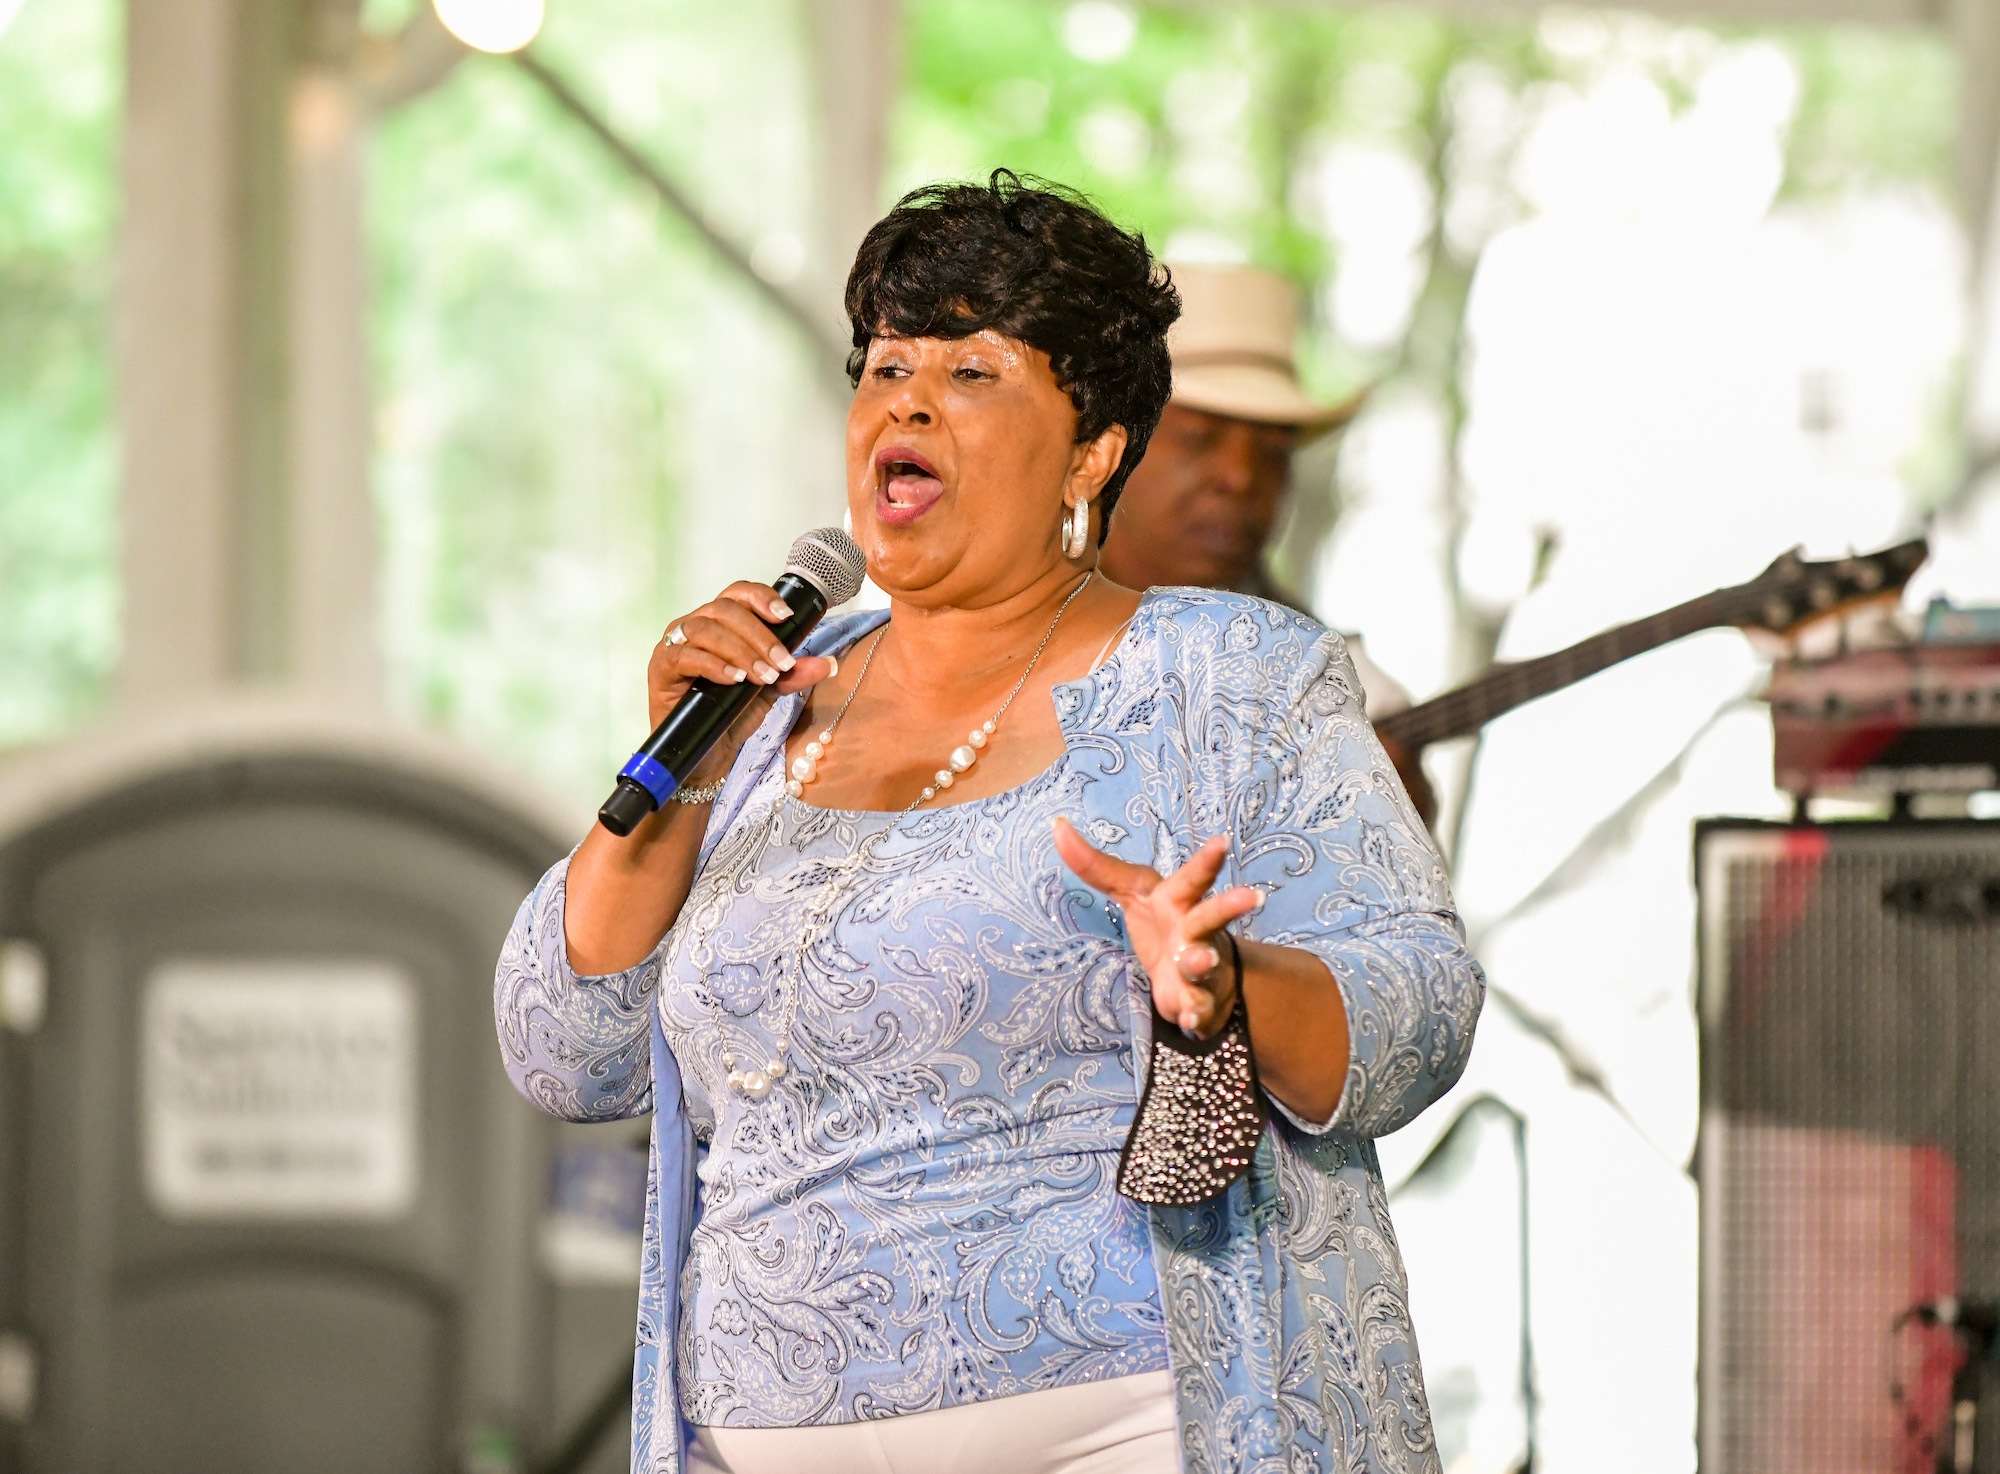 Ms Jody Live At Chicago Blues Fest [GALLERY] 10